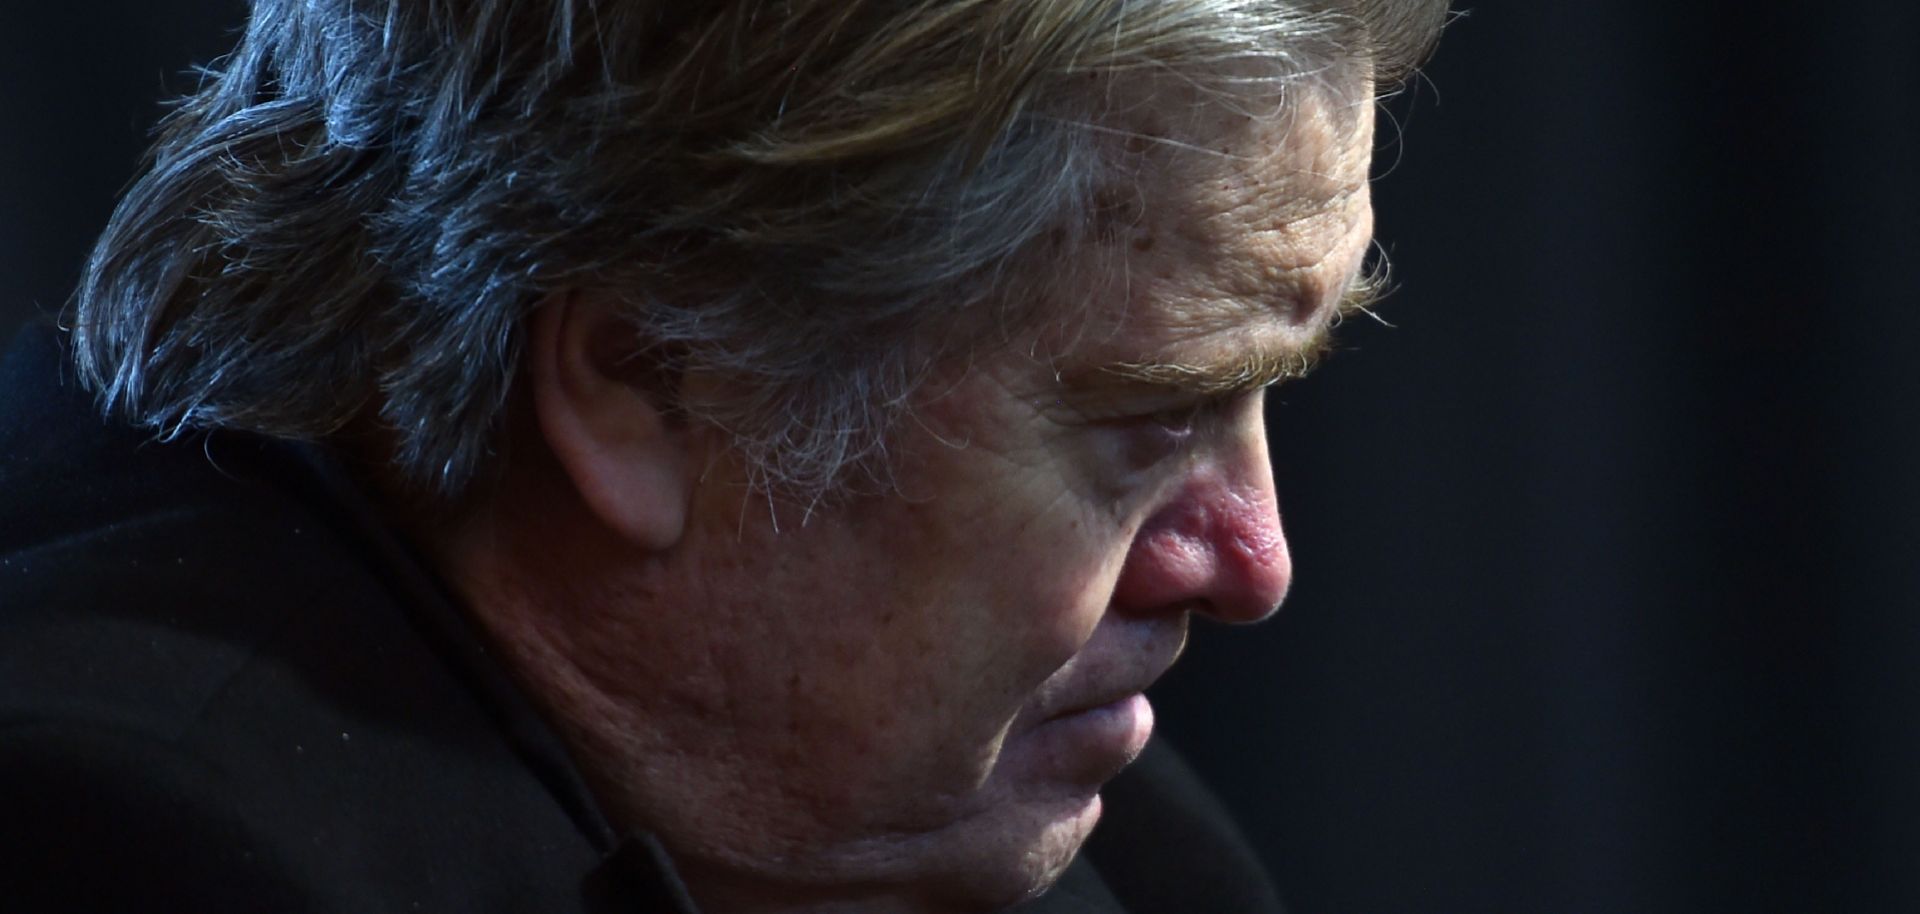 History may not repeat itself precisely, but according to Steve Bannon, it sure does rhyme.